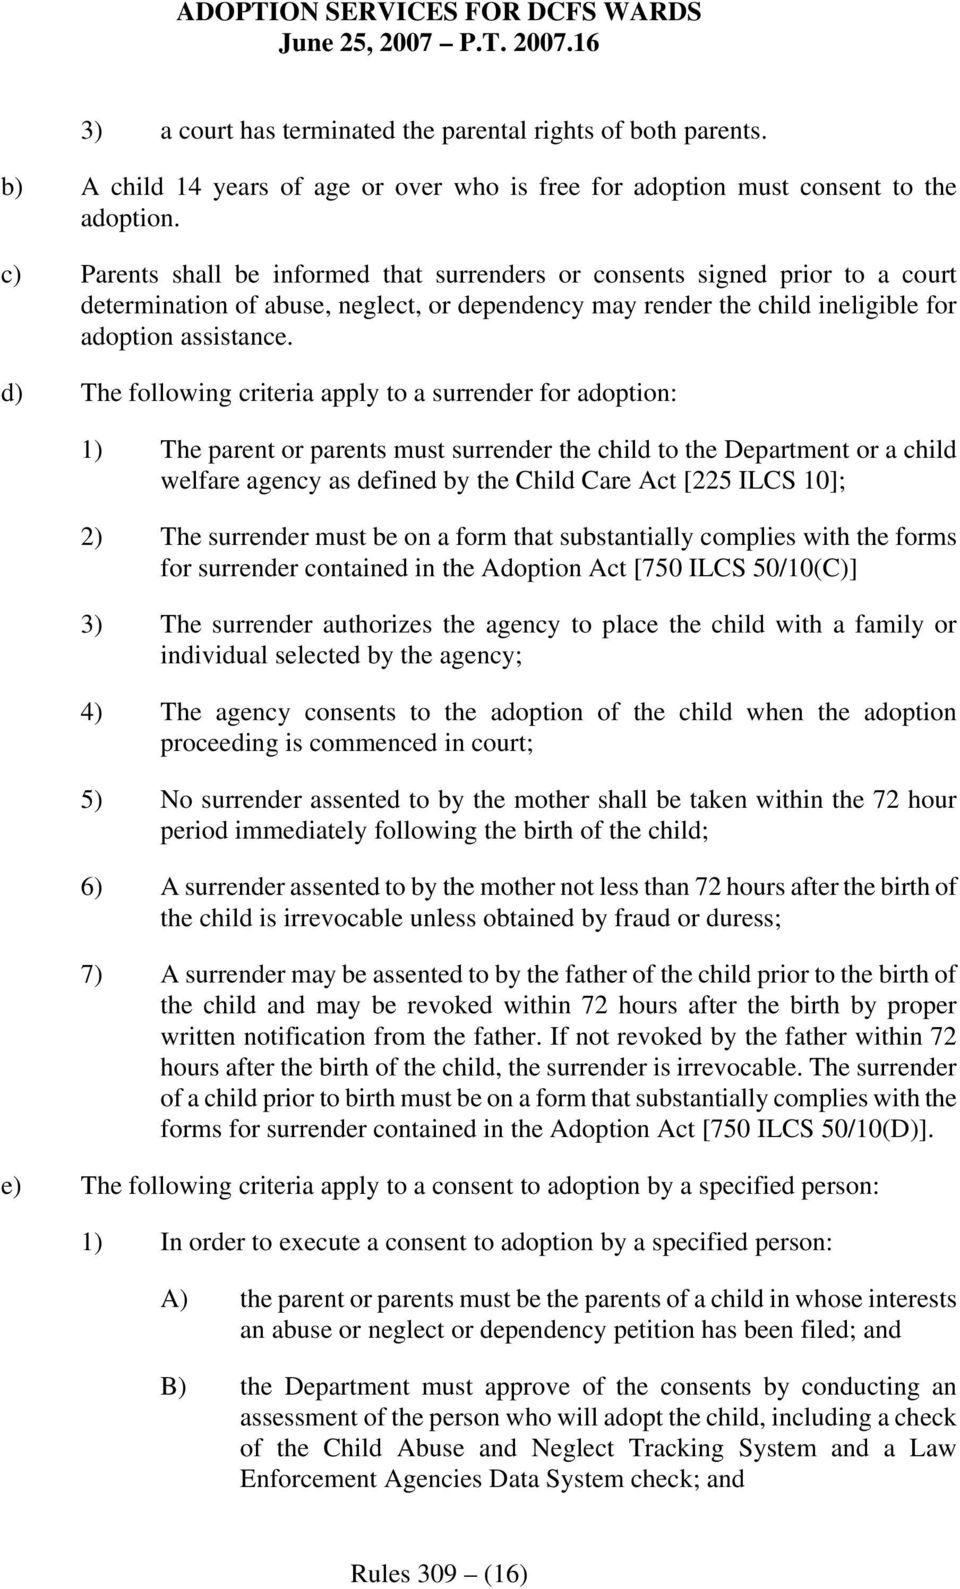 d) The following criteria apply to a surrender for adoption: 1) The parent or parents must surrender the child to the Department or a child welfare agency as defined by the Child Care Act [225 ILCS